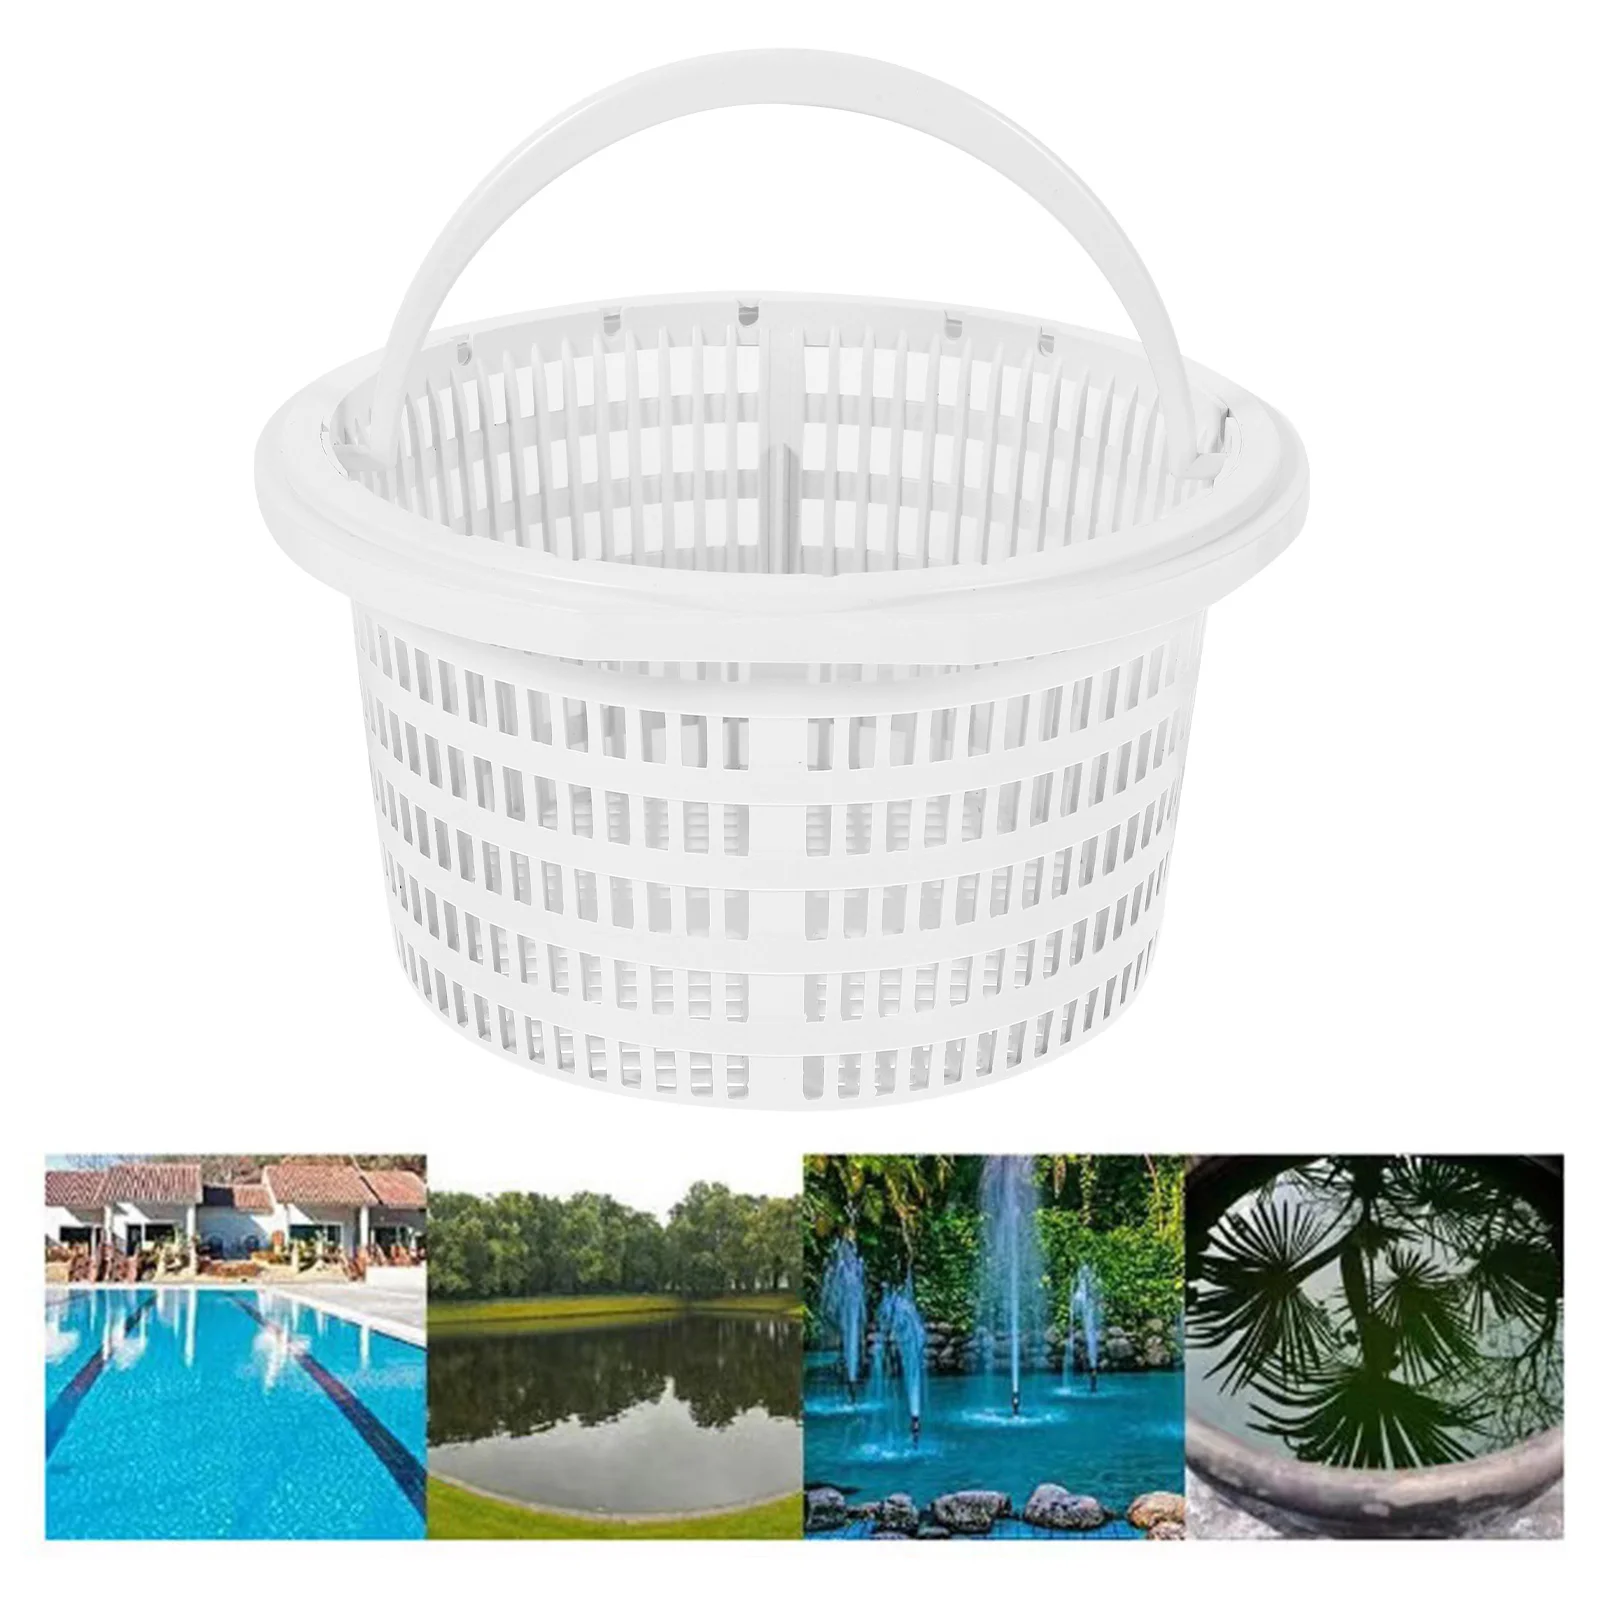 

Swimming Pool Accessories Litter Filting Basket Plastic Filter Cleaning Gadget Skimmer Garbage